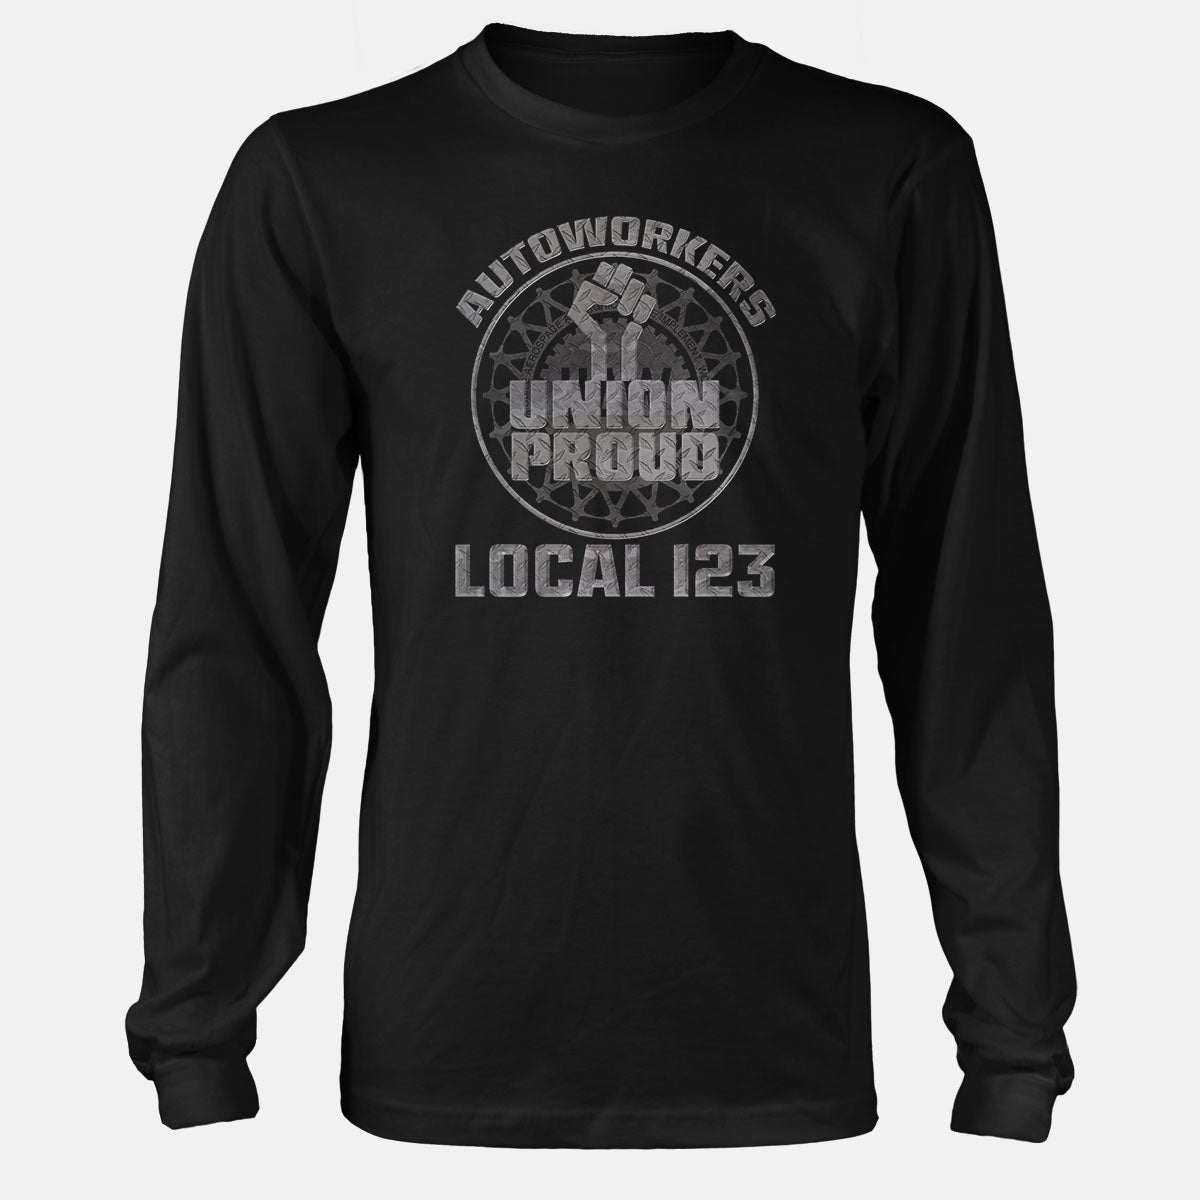 Auto Workers Iron Fist Apparel